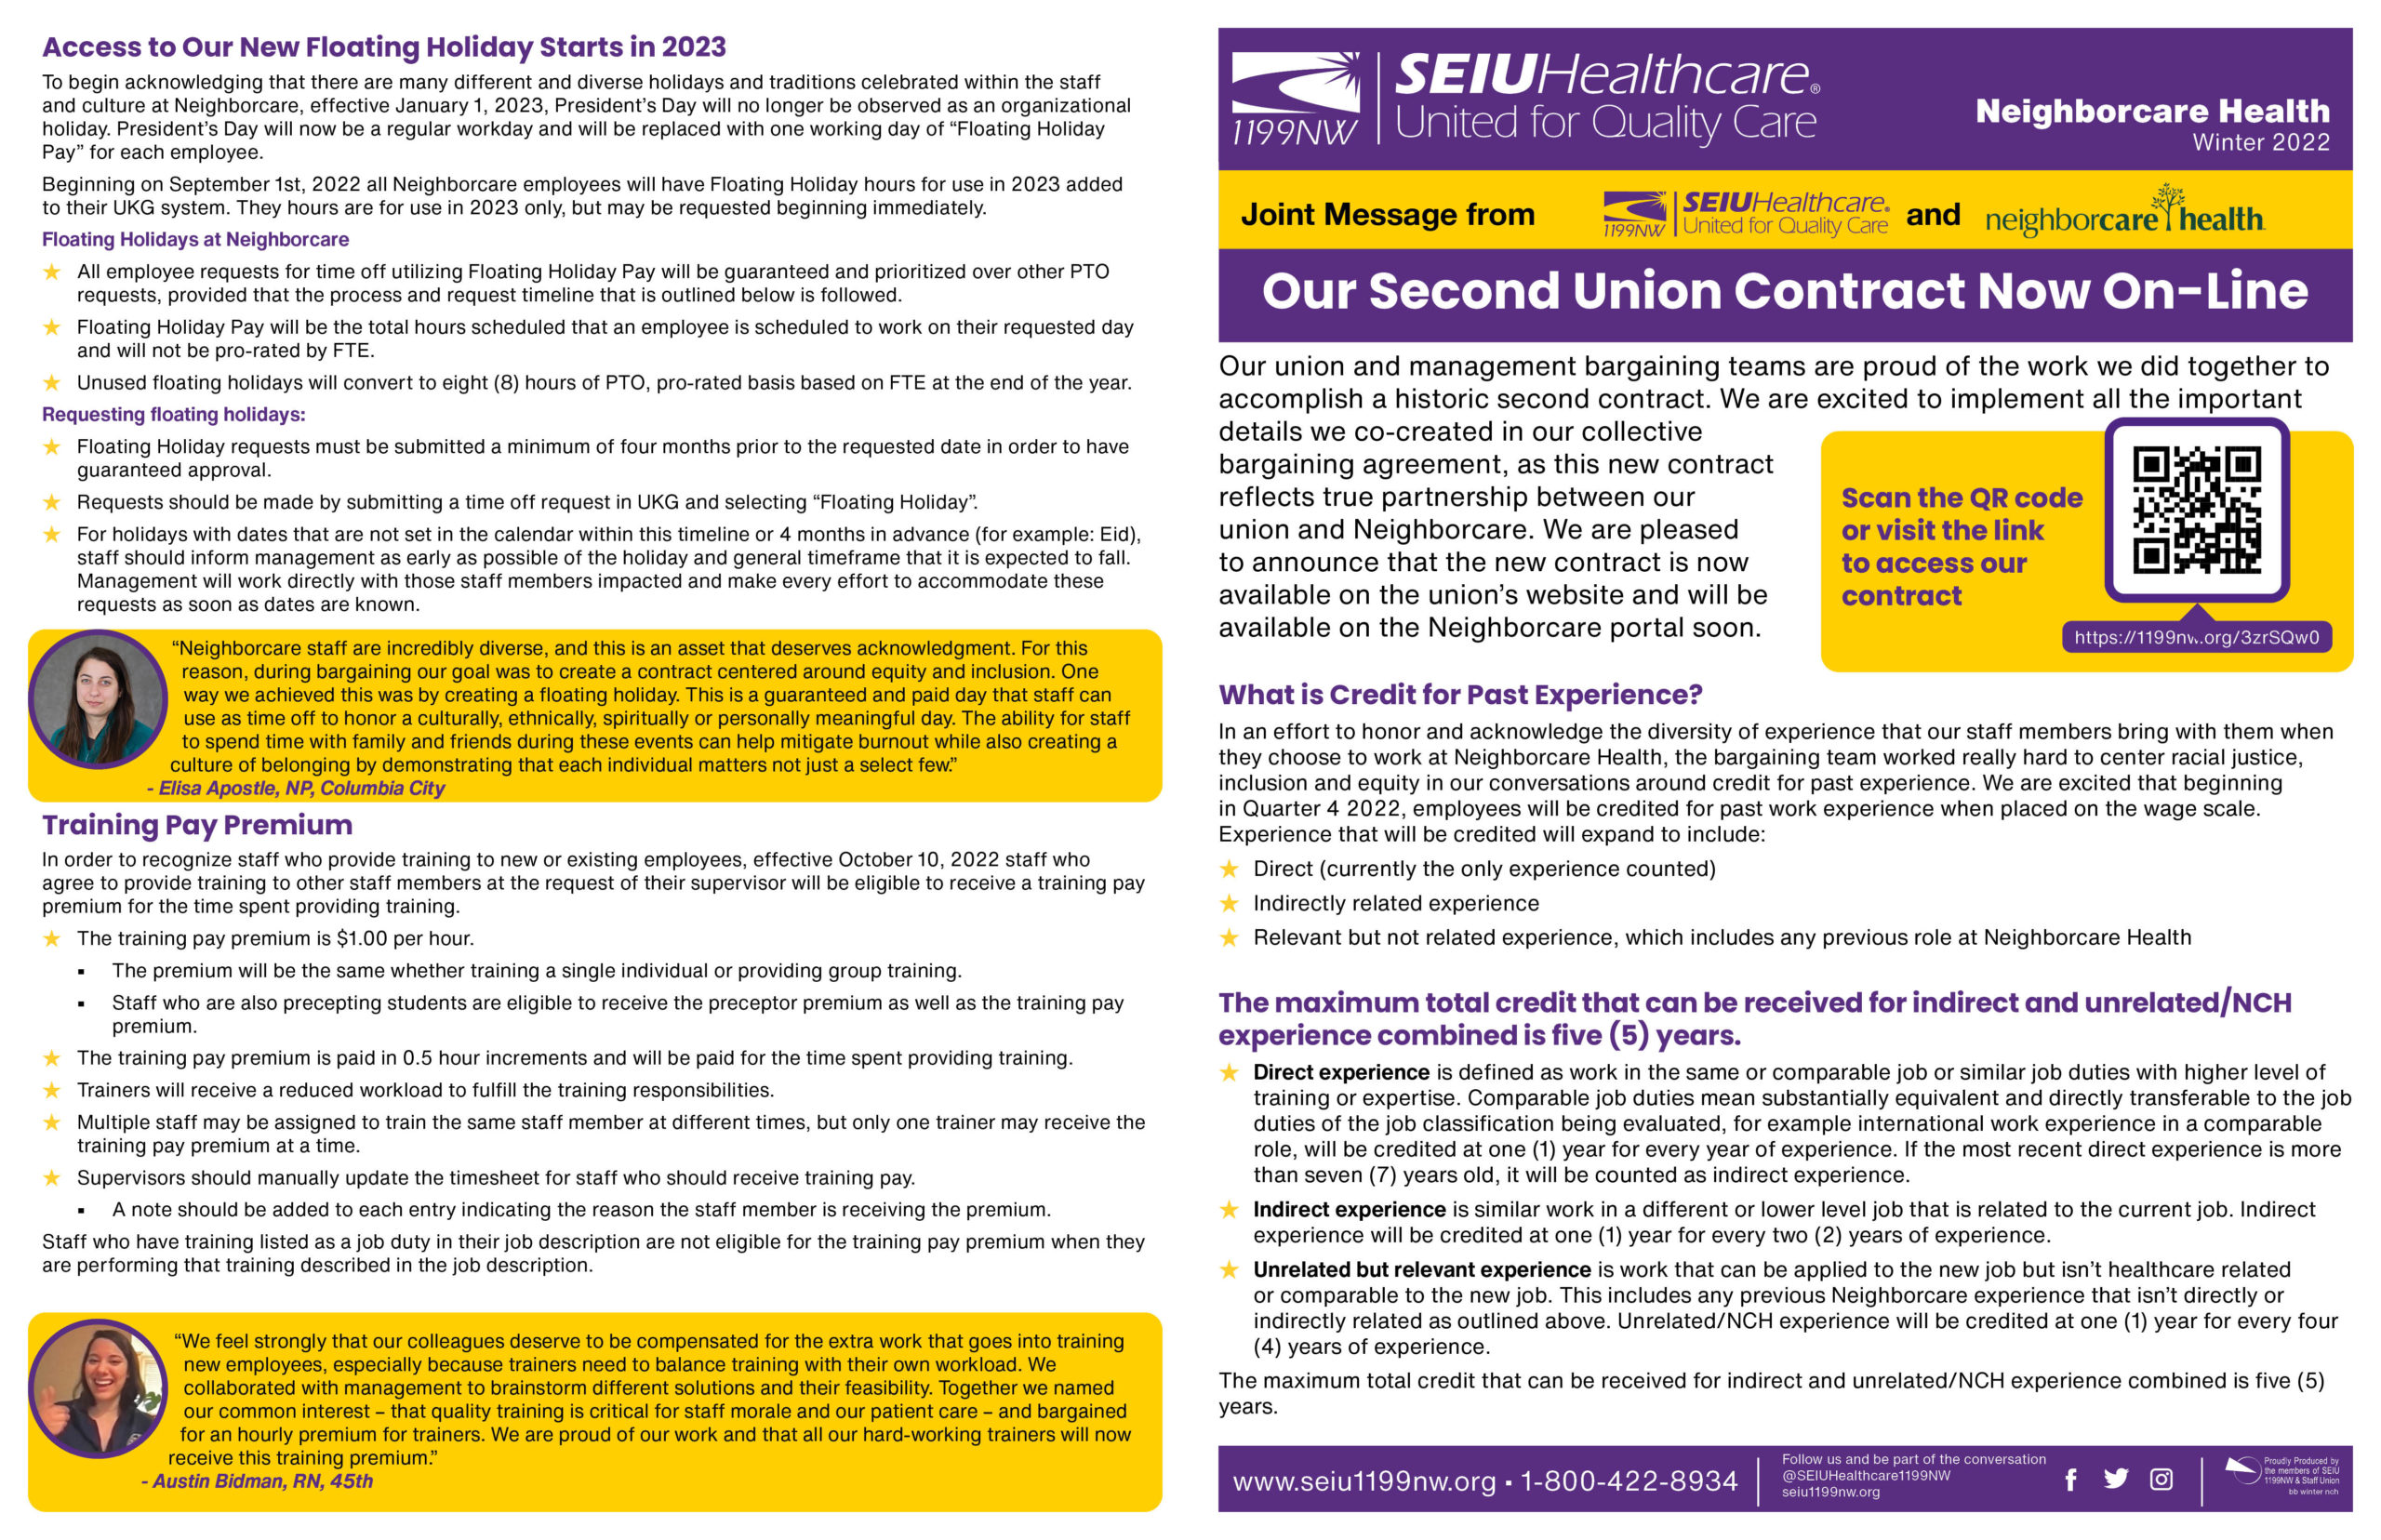 Our Second Union Contract Now On-Line